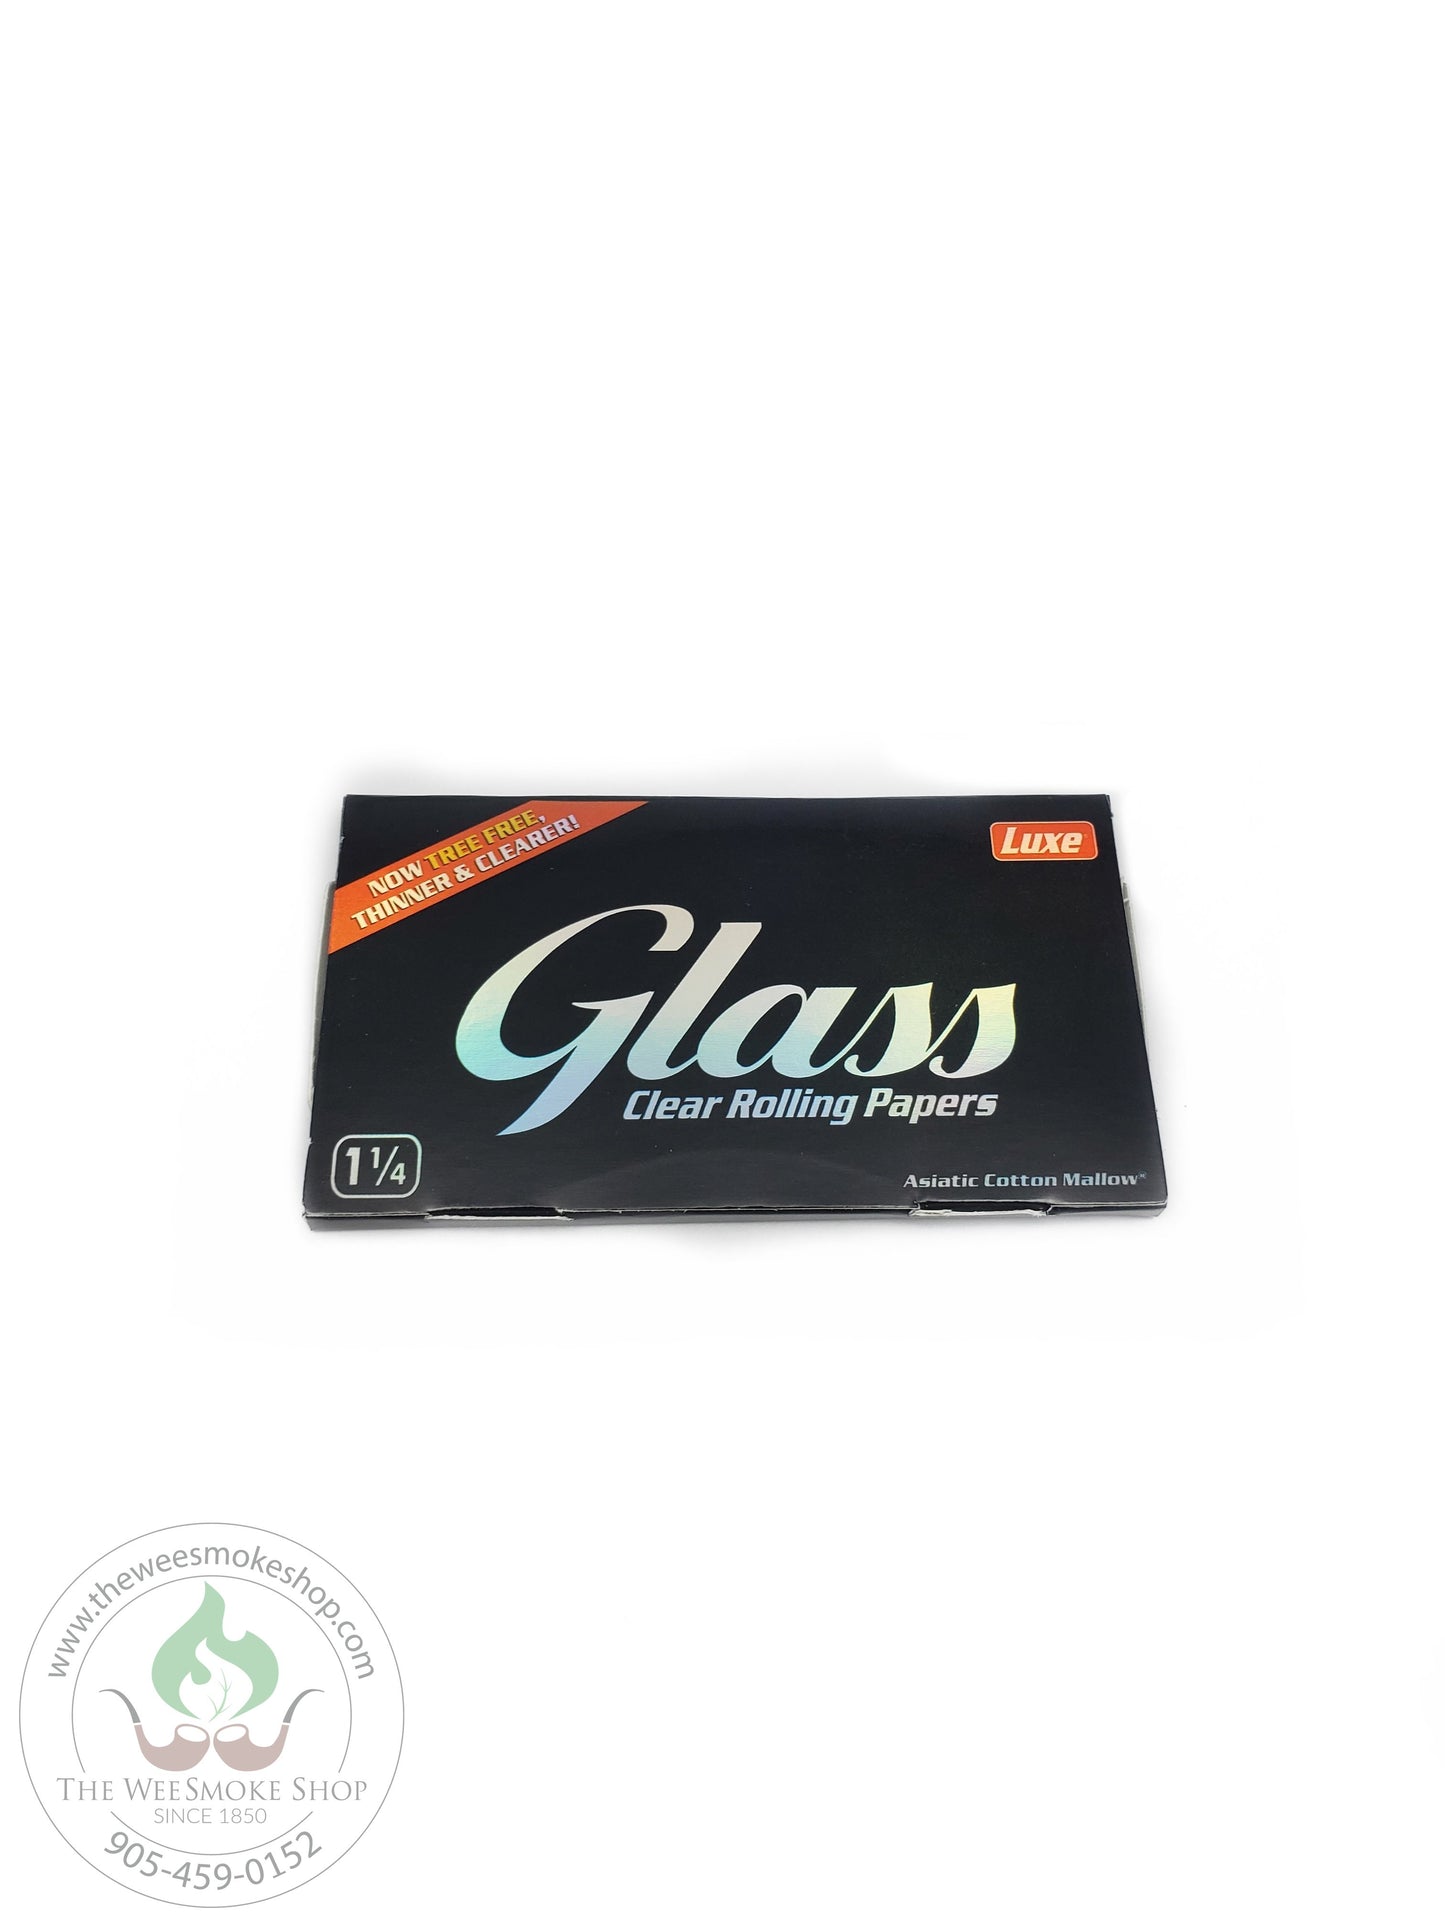 Glass Clear Rolling Papers. 1 1/4 size. The Wee Smoke Shop